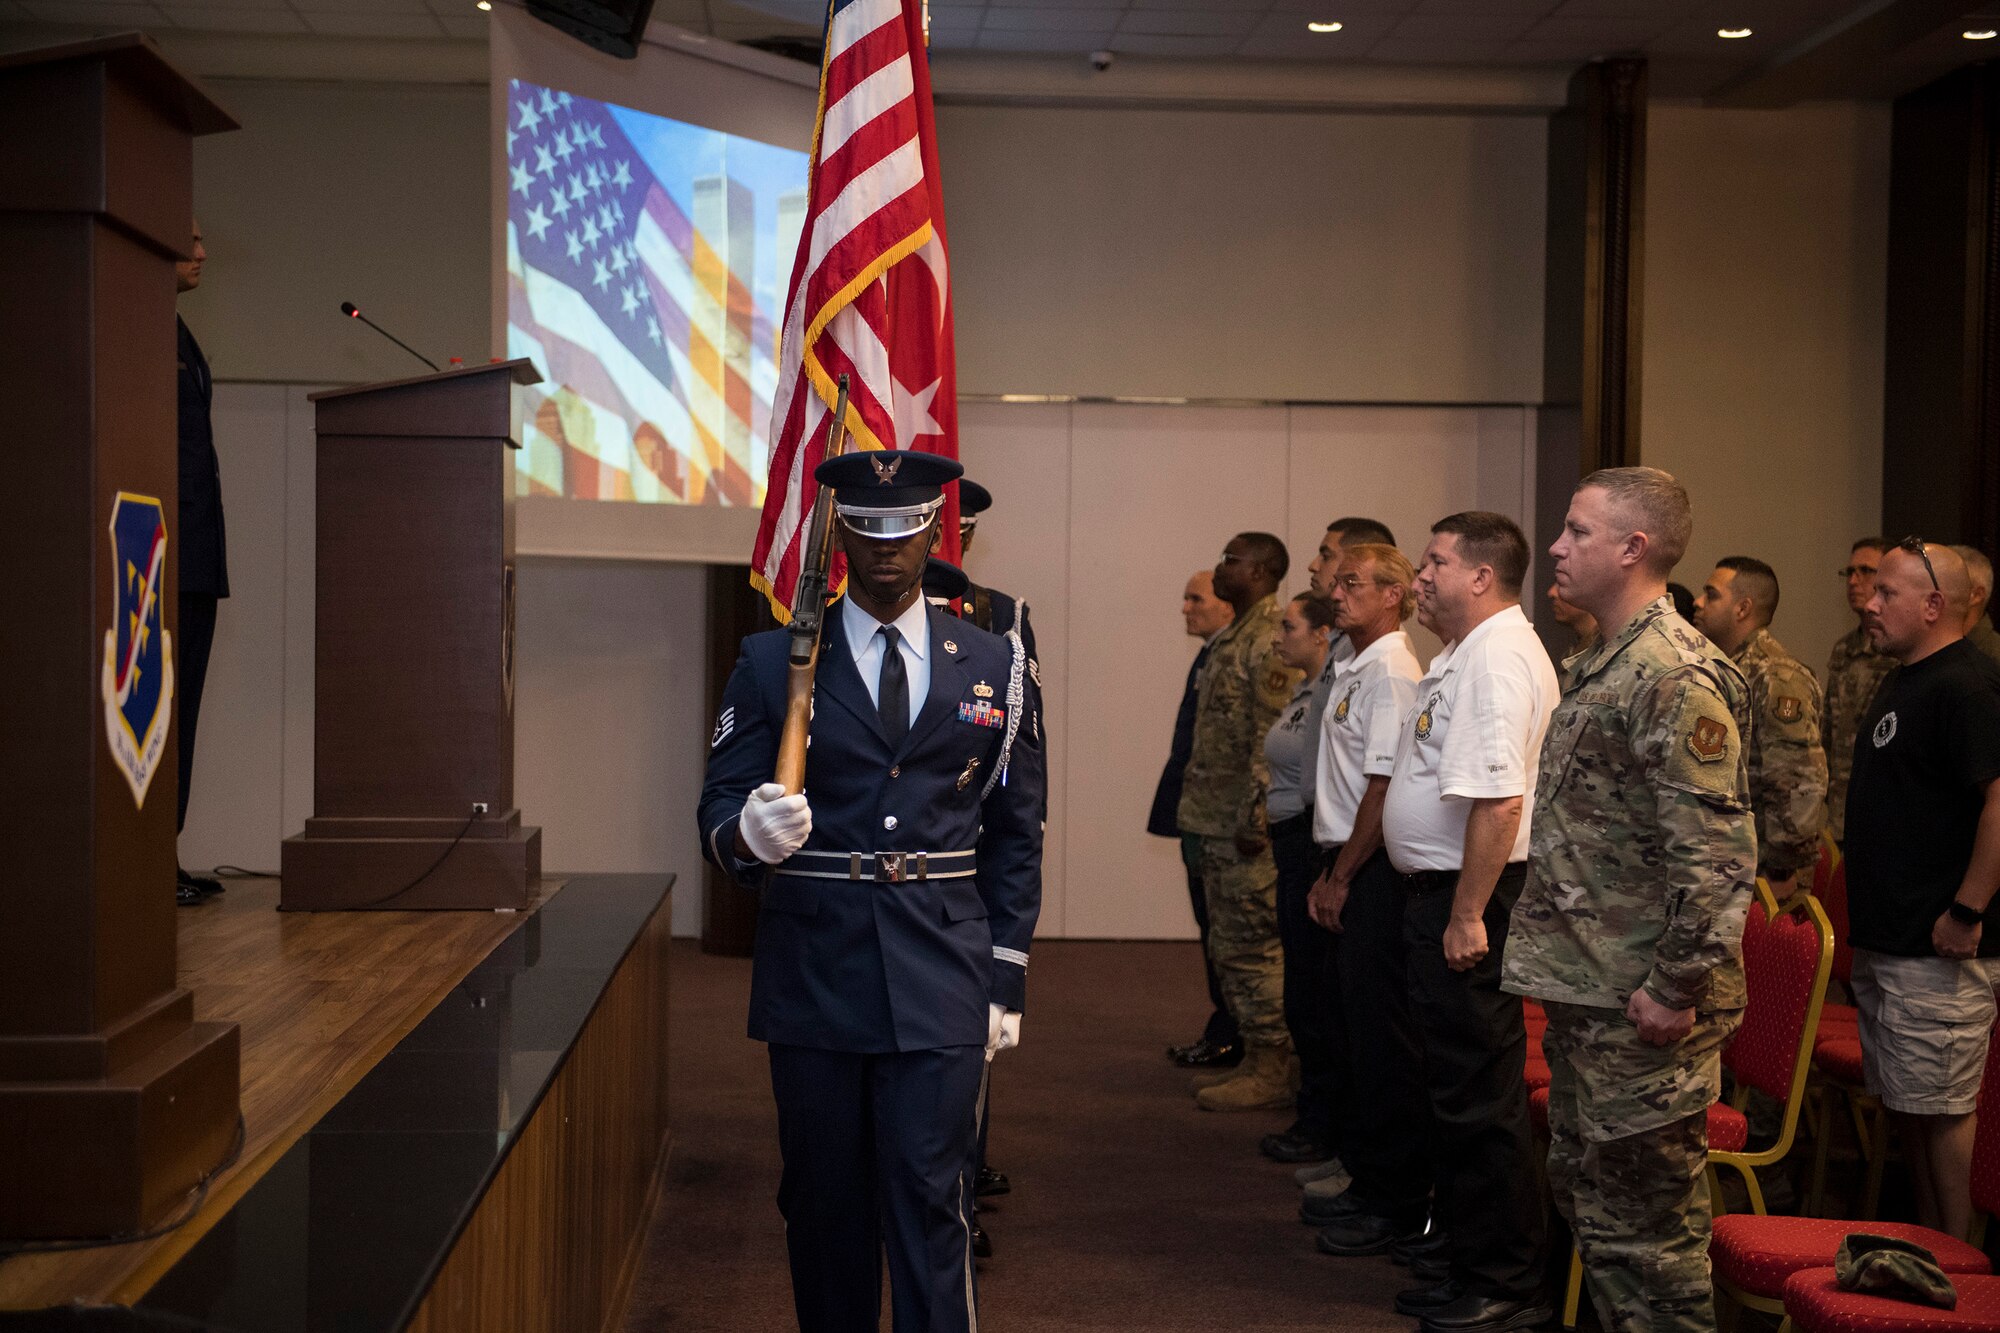 The 39th Air Base Wing Honor Guard present the colors during a 9/11 remembrance ceremony Sept. 11, 2019, at Incirlik Air Base, Turkey. The ceremony commemorated the men and women killed during the attacks on the World Trade Center and the Pentagon. (U.S. Air Force photo by Staff Sgt. Ceaira Tinsley)